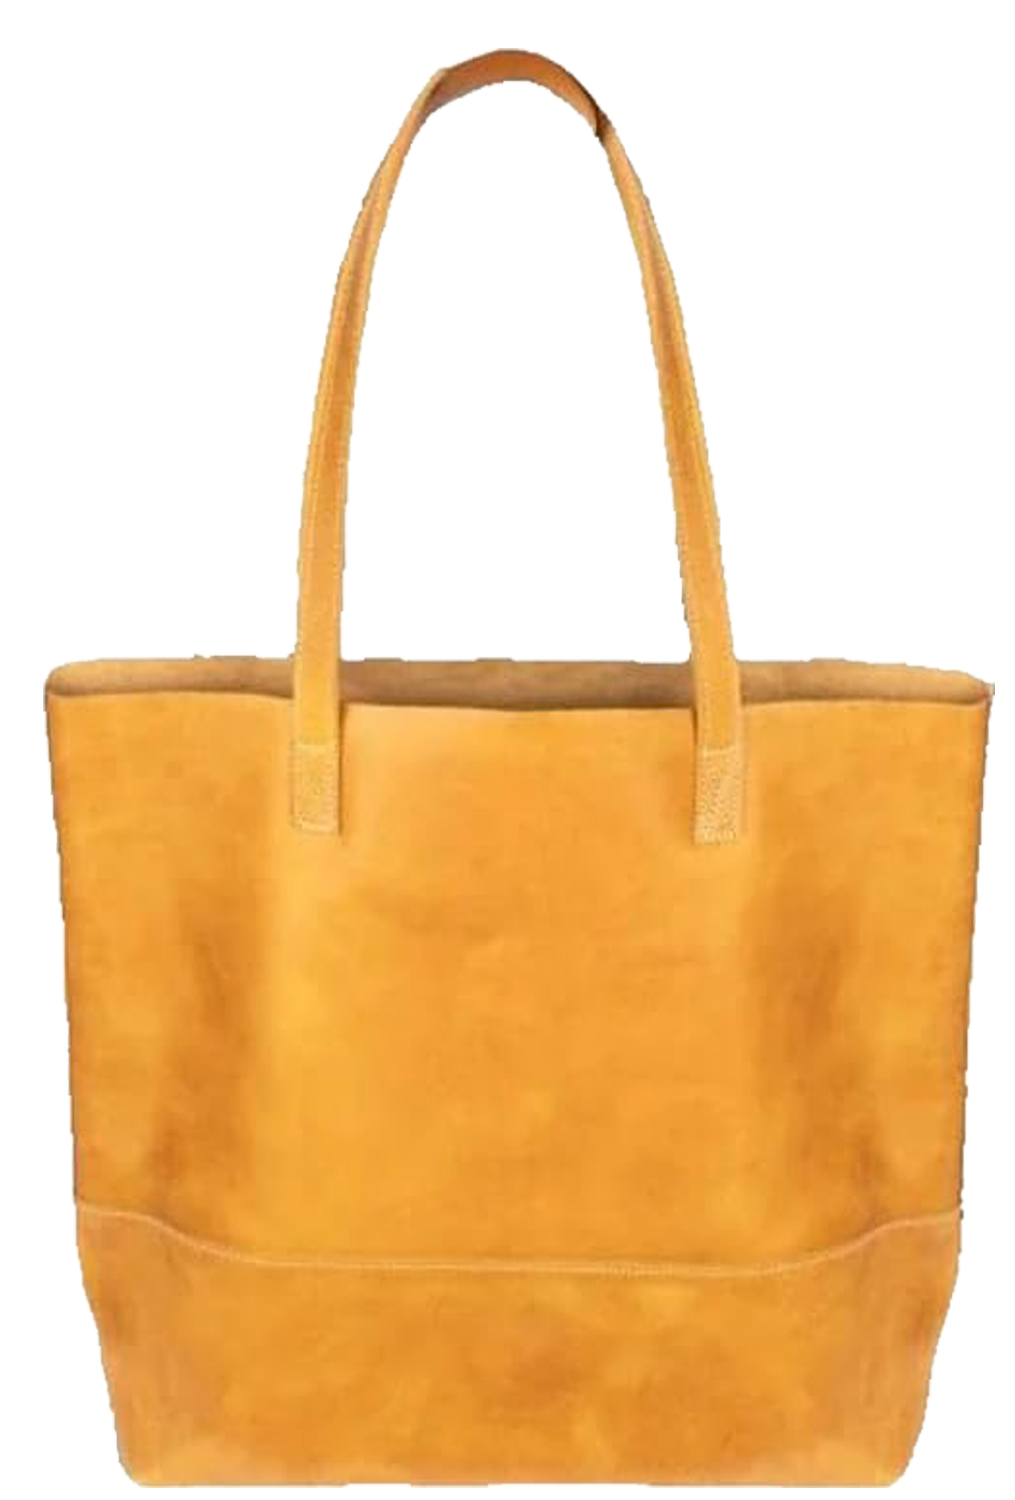 TOTE BAG Camel : Women’s Large Sling Shopping Carryall, Hand Crafted